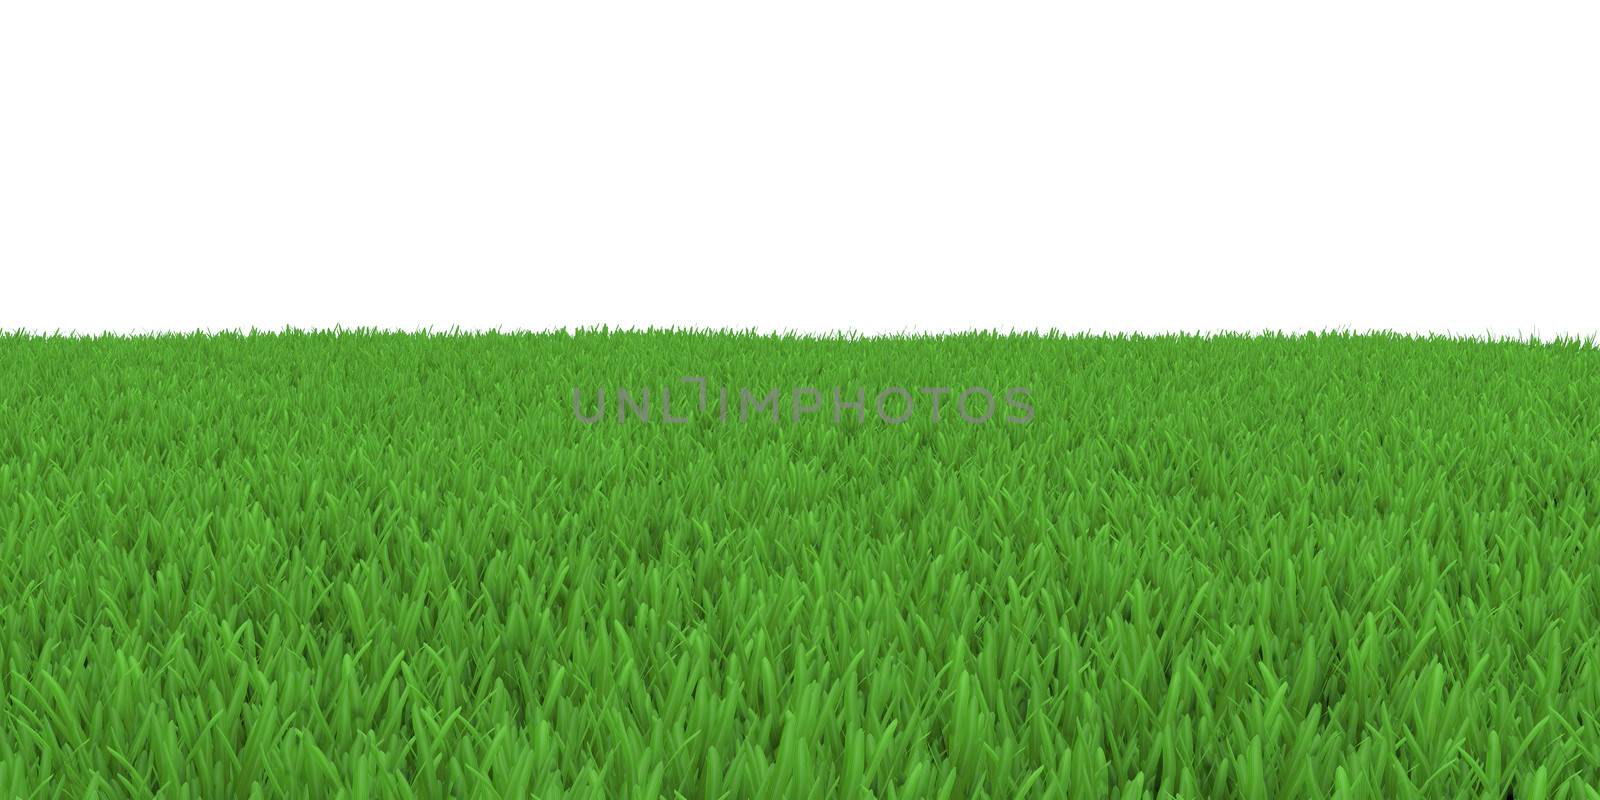 Field of green grass. 3d render on white background